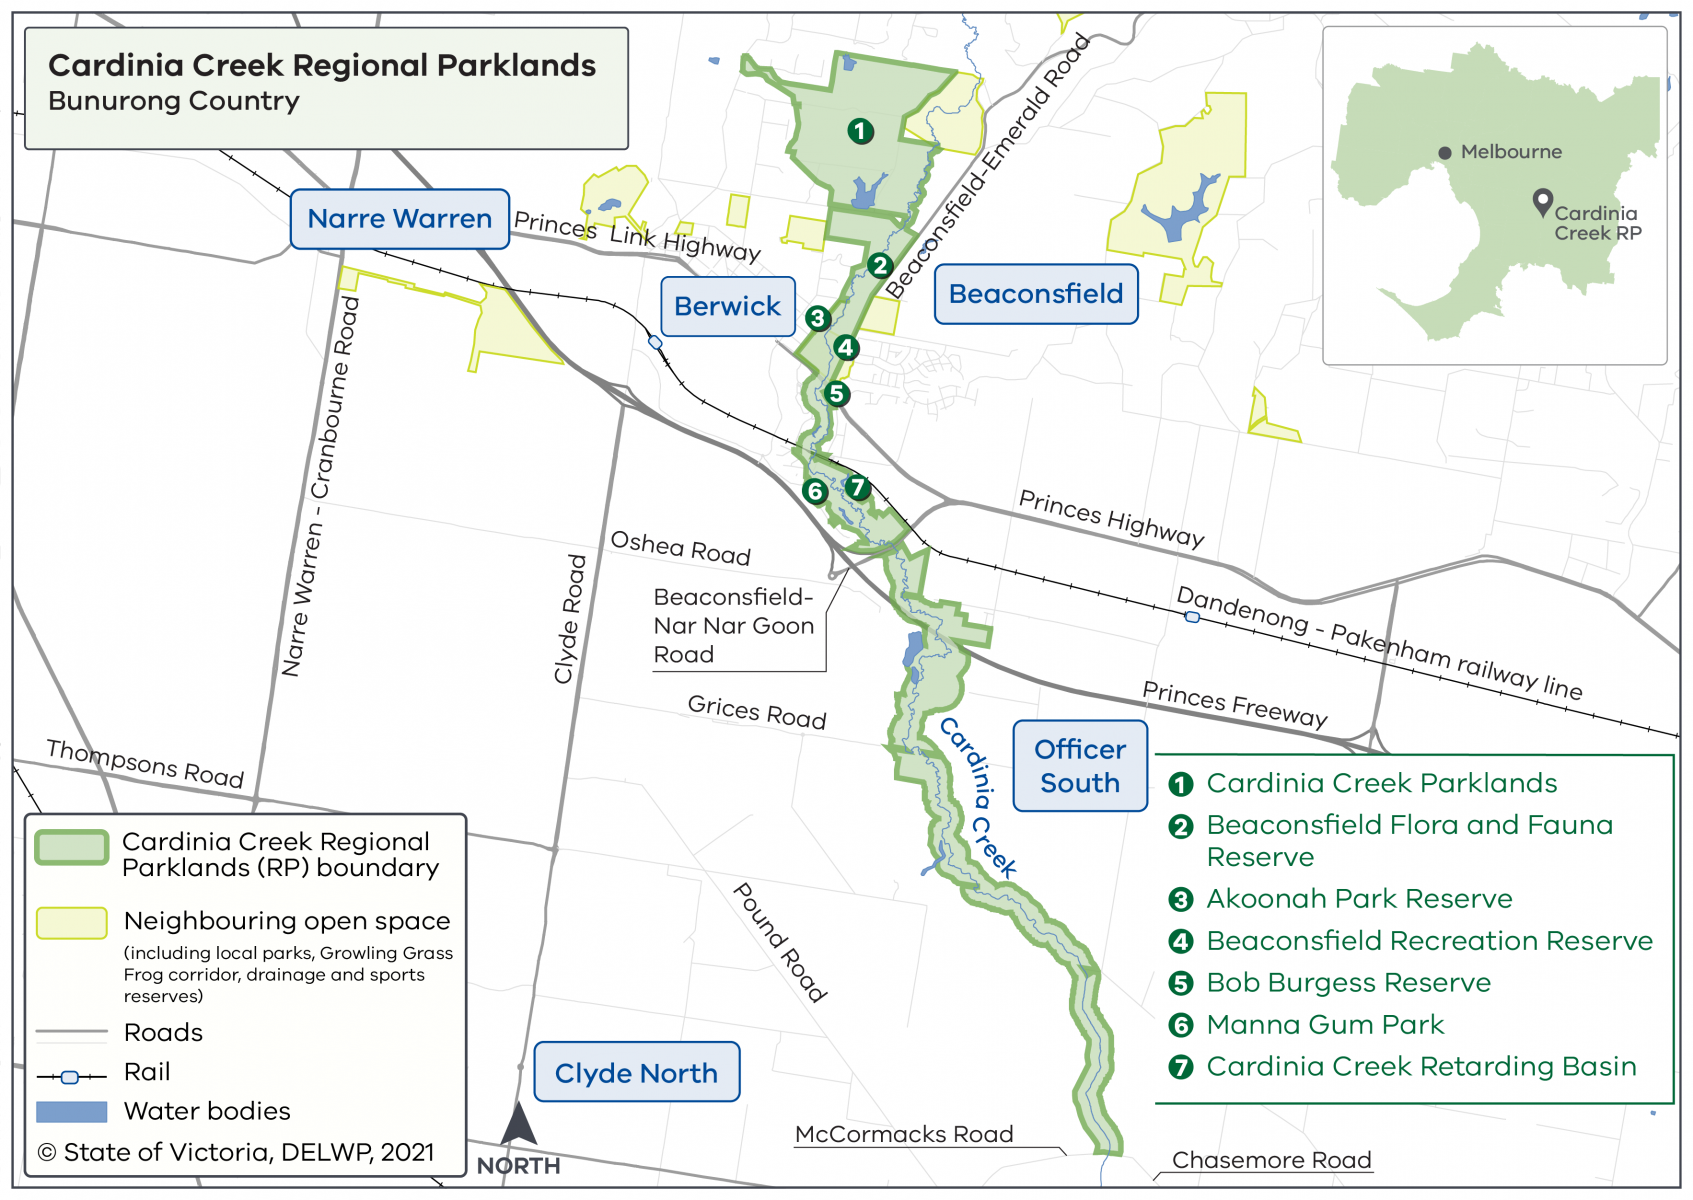 Cardinia Creek Regional Parklands map. Situated between Naree Warren, Berwick, Beaconsfield, Officer South and Clyde North